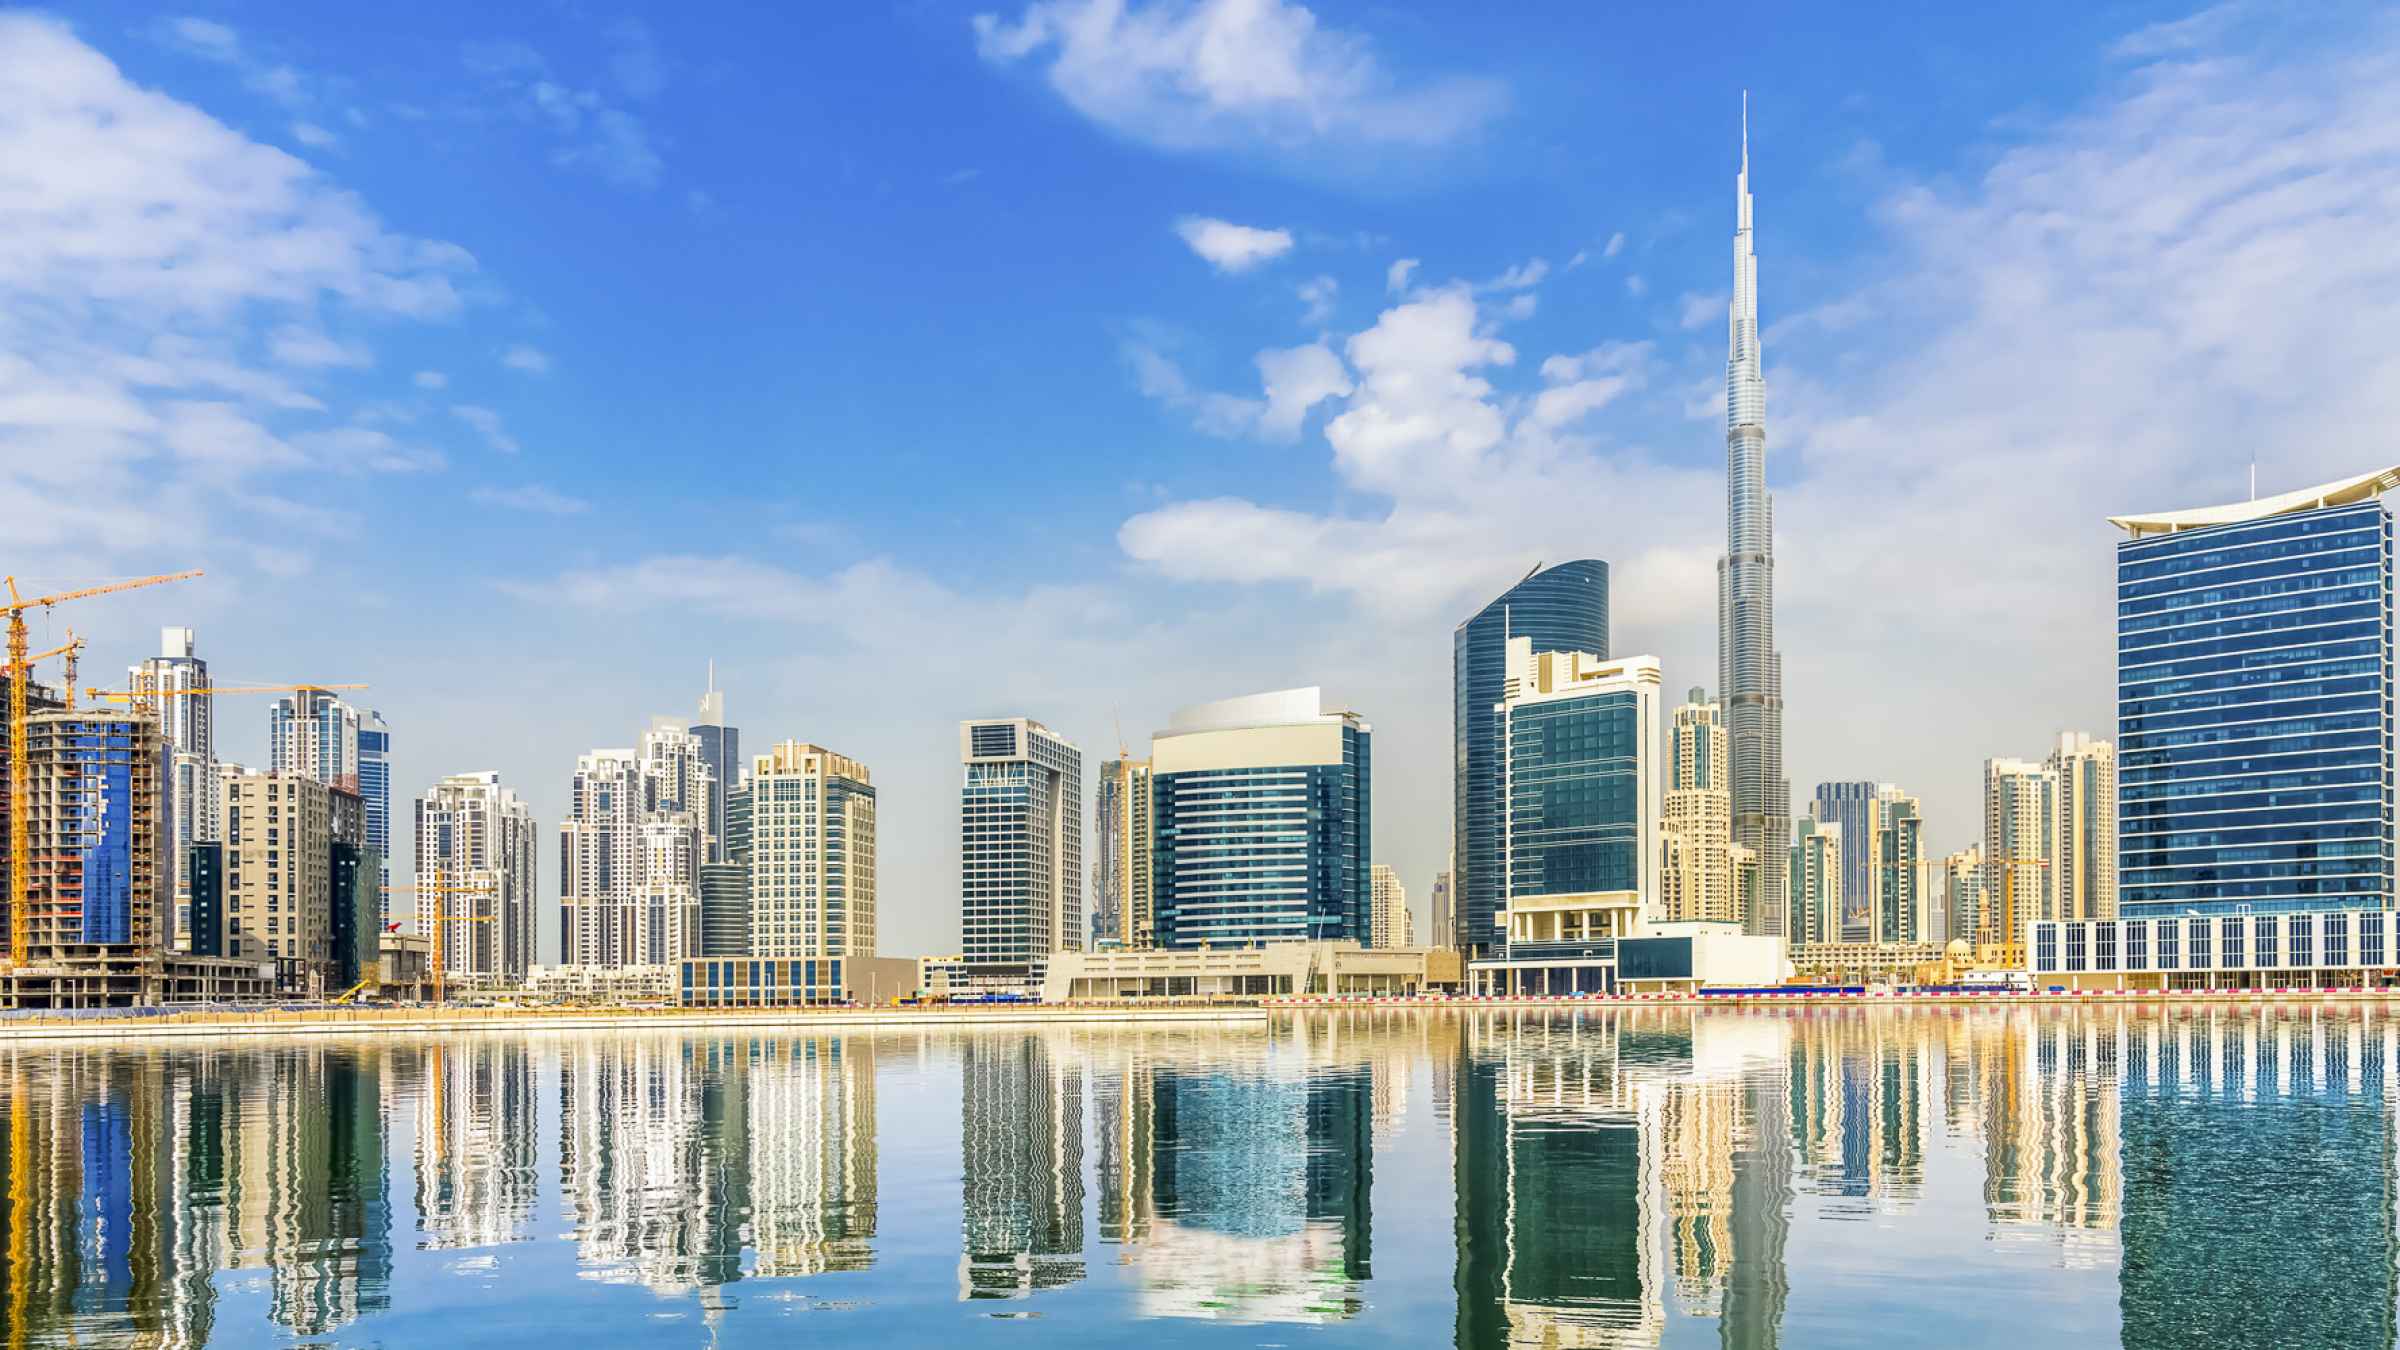 Discover Convenience: Studio for Rent in Dubai Monthly 1500 AED!